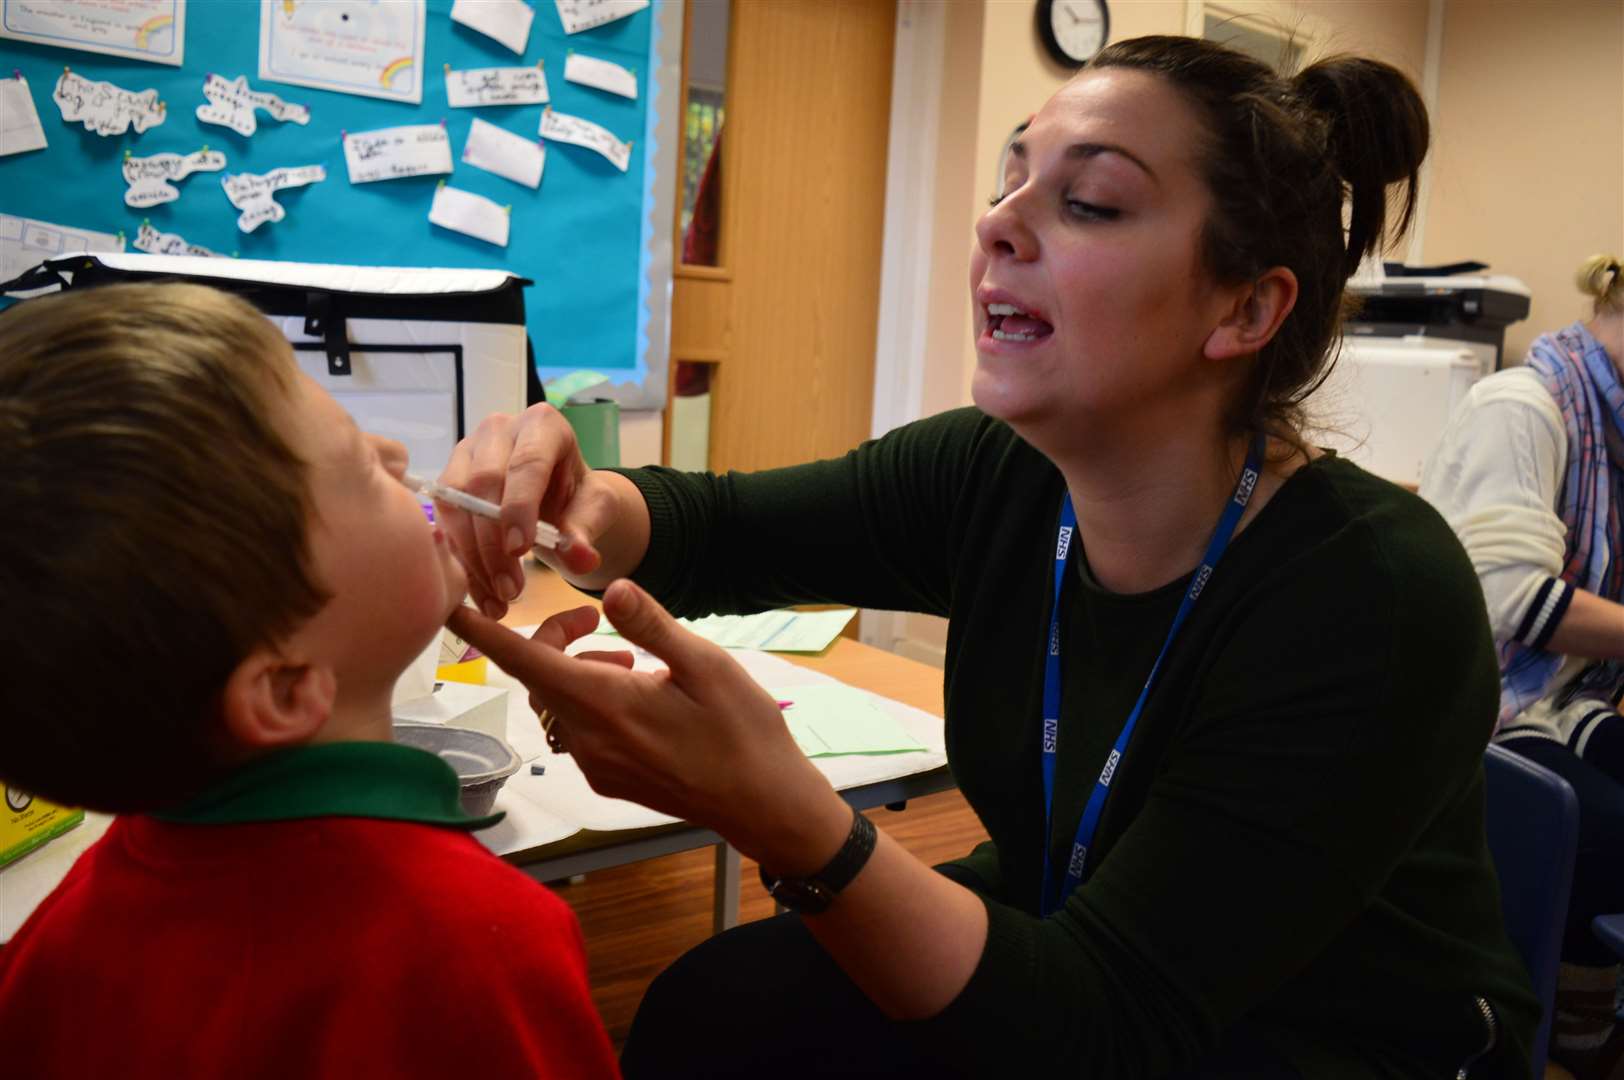 Parents must give consent in advance for their children to receive a flu immunisation